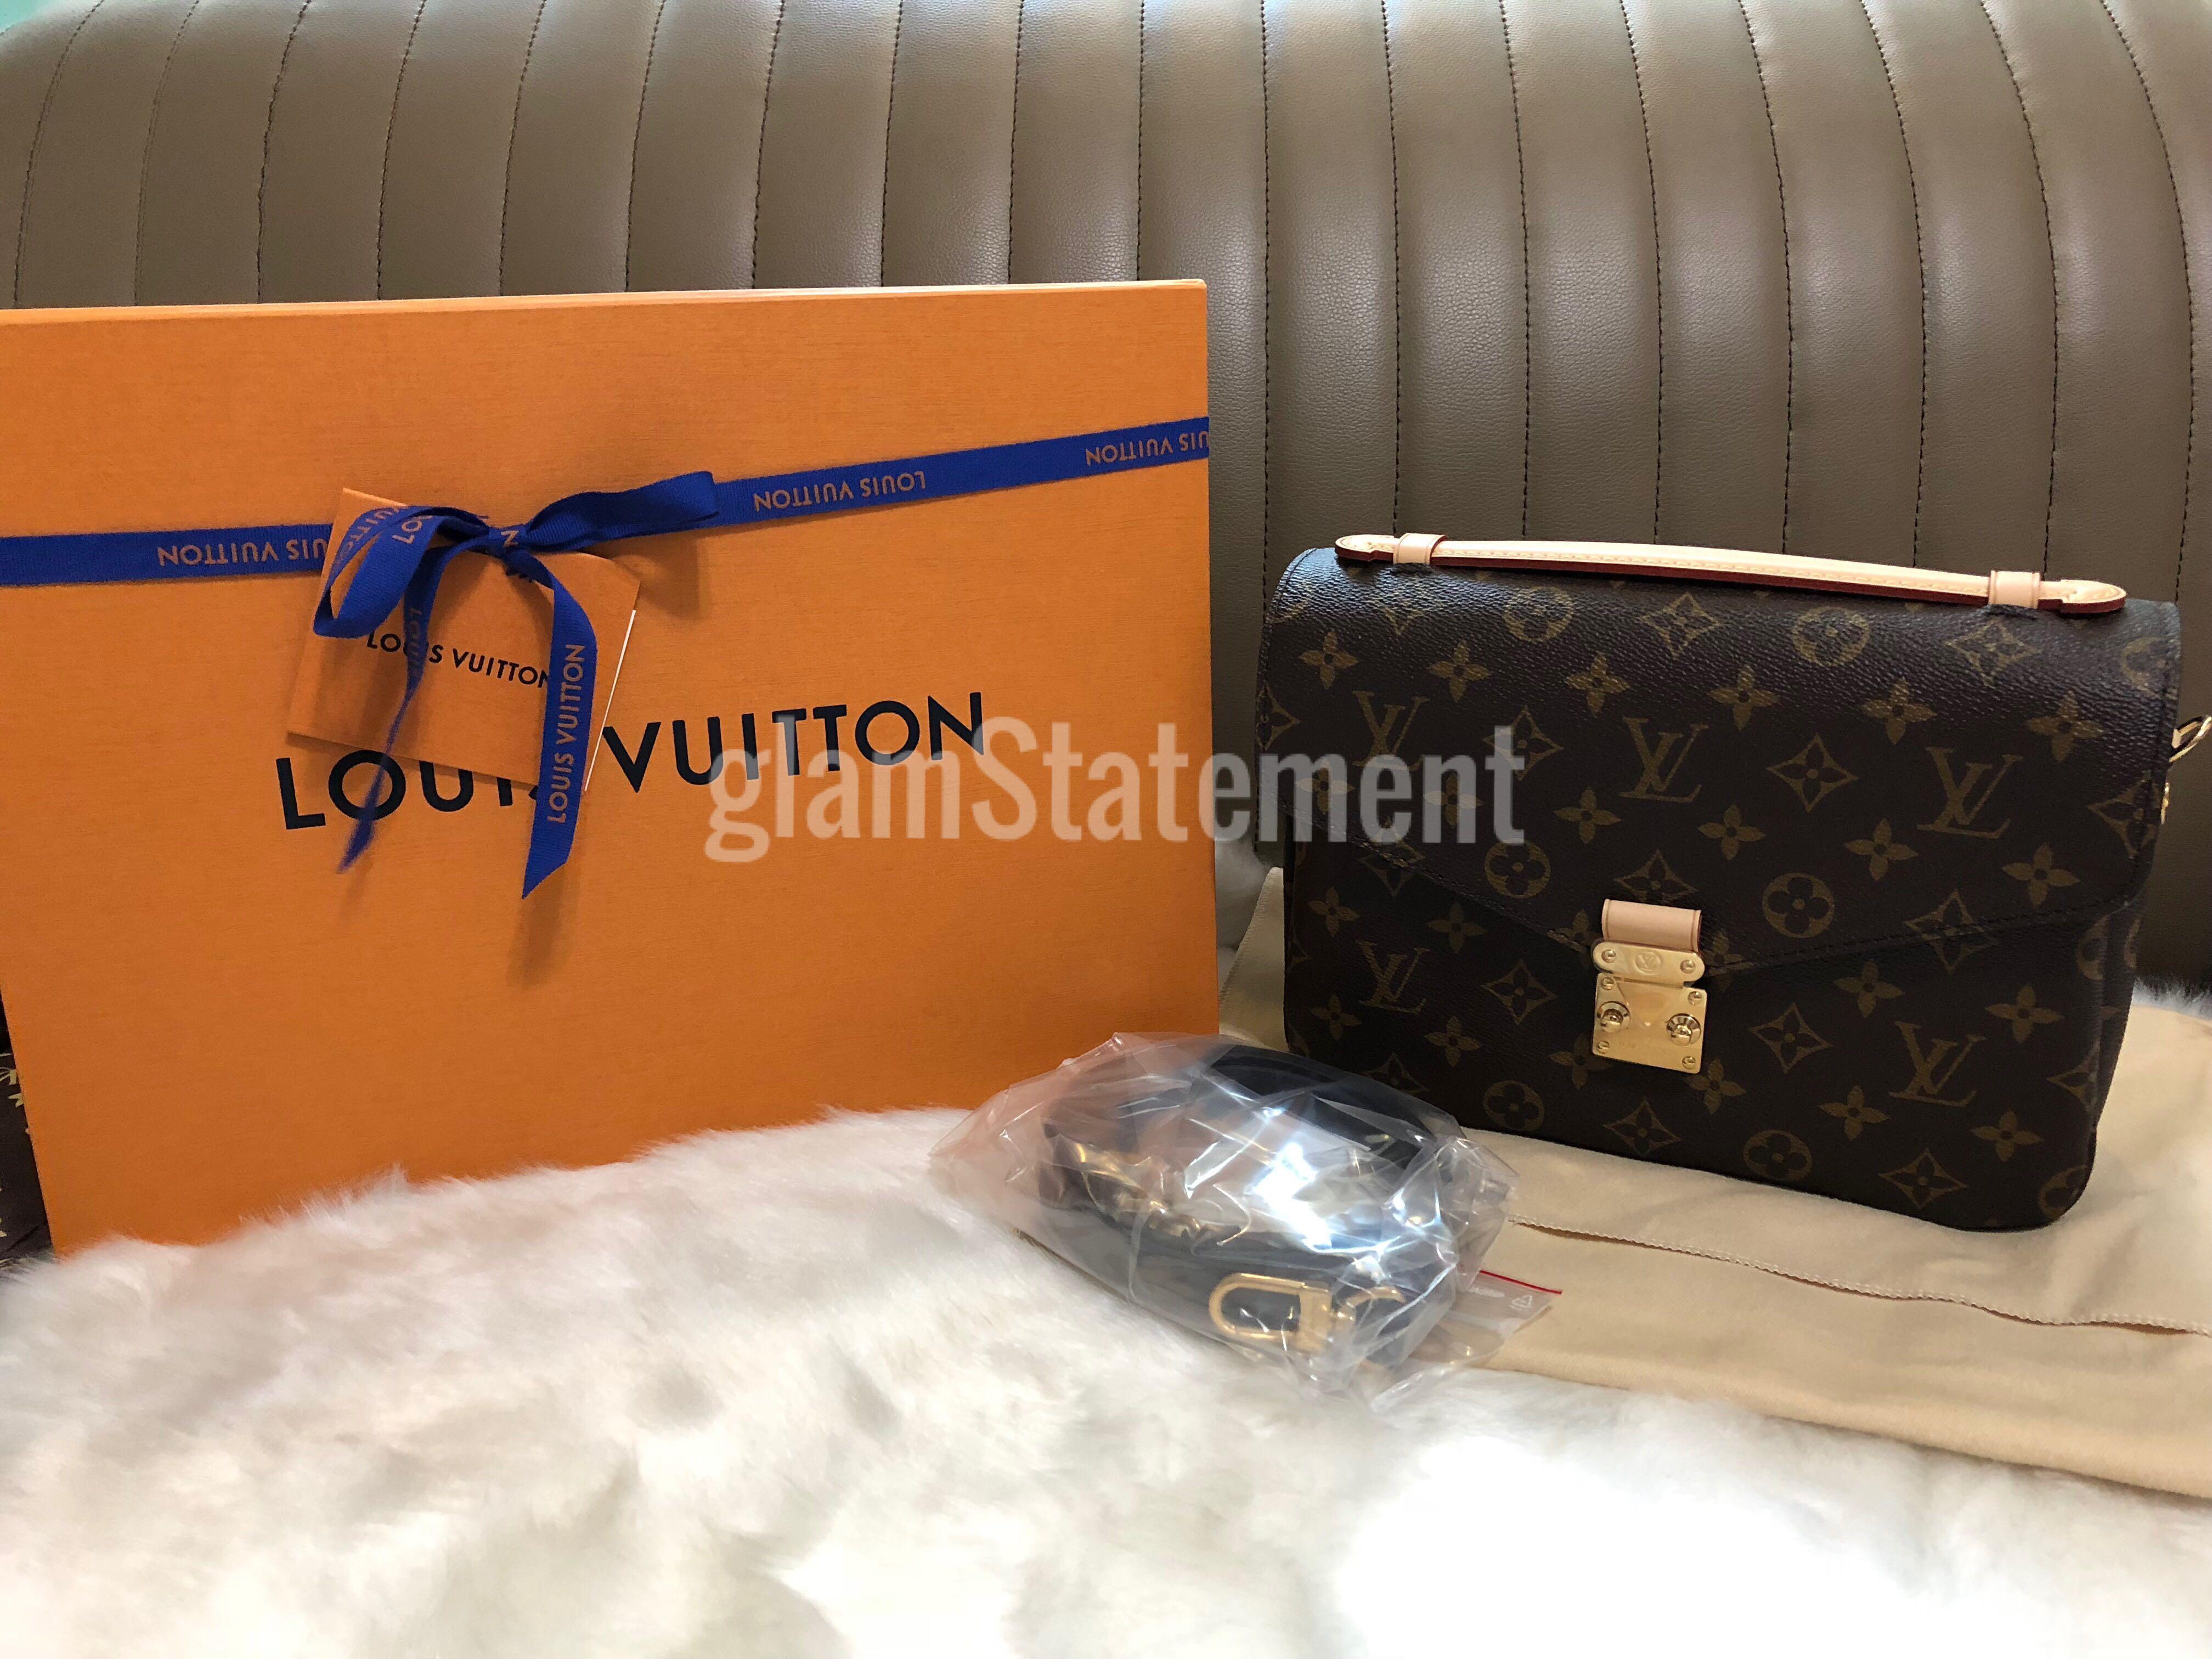 BN LV Micro Metis, Luxury, Bags & Wallets on Carousell